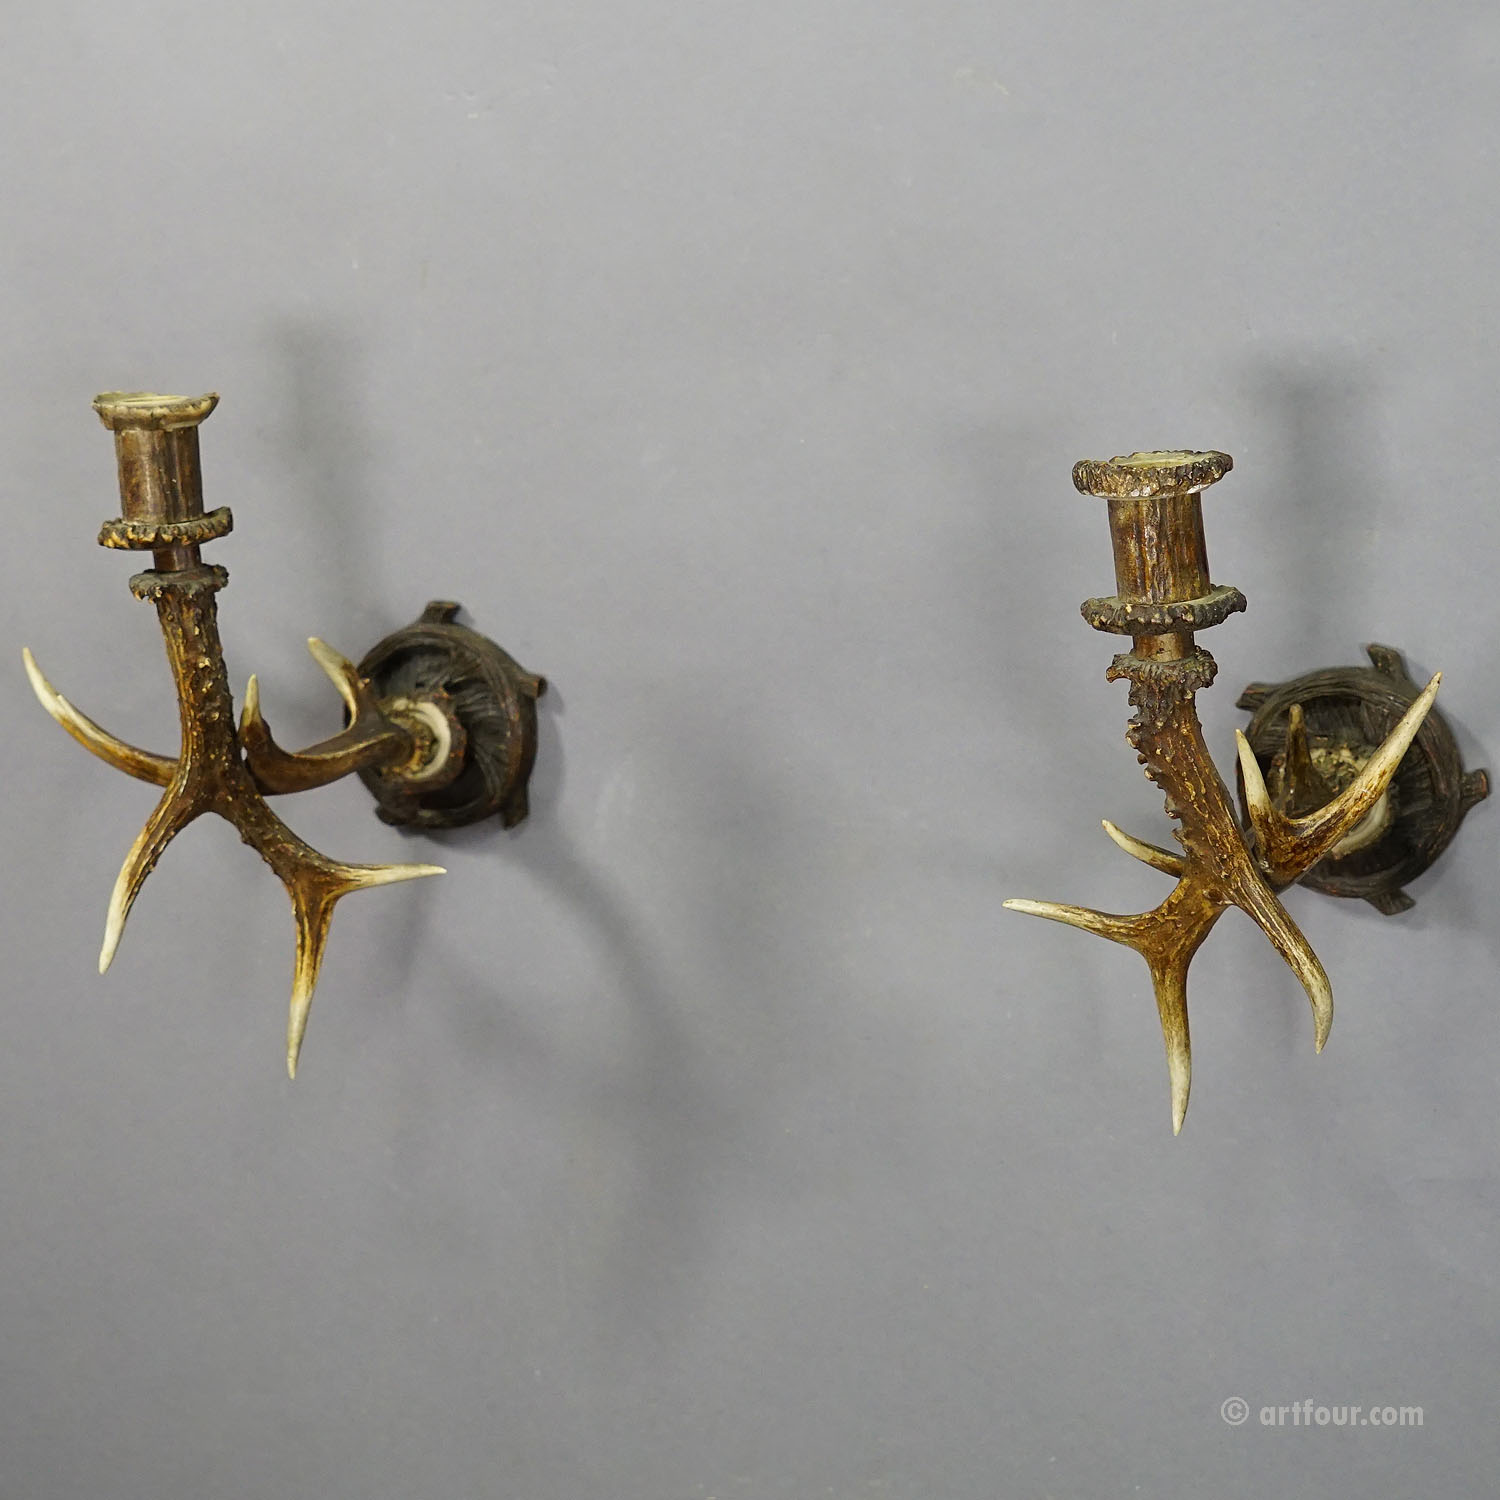 A Pair Black Forest Candle Sconces with Deer Horns, Germany ca. 1900